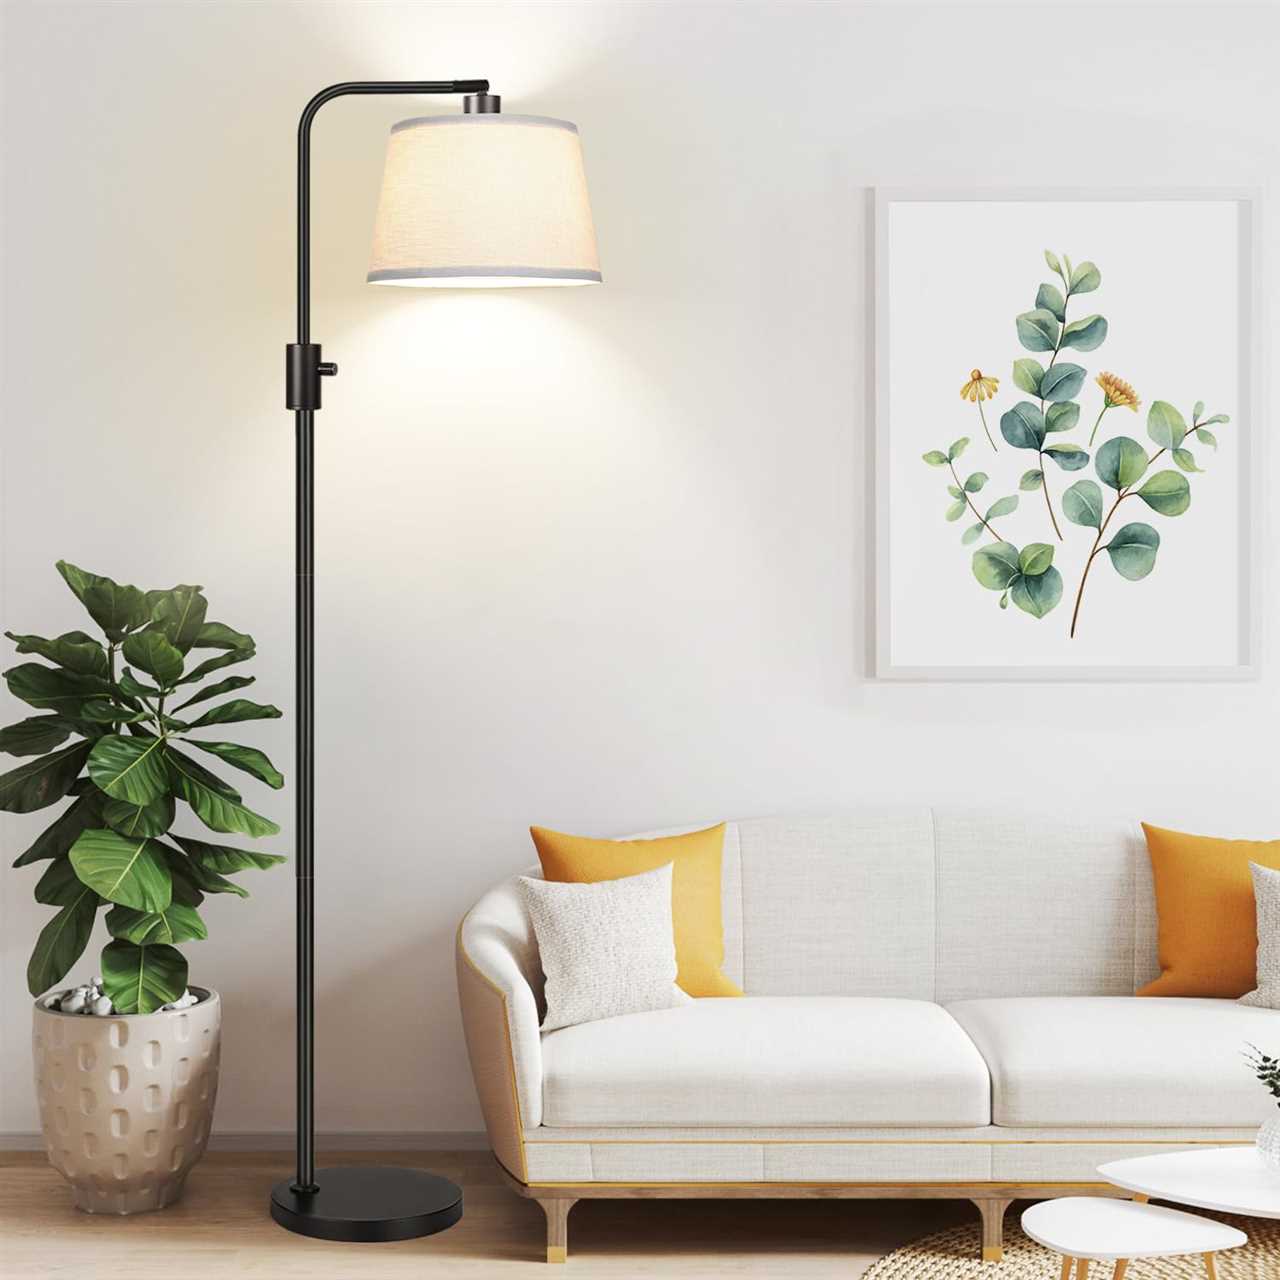 Discover the Perfect Floor Lamp Shade for Your Home Décor